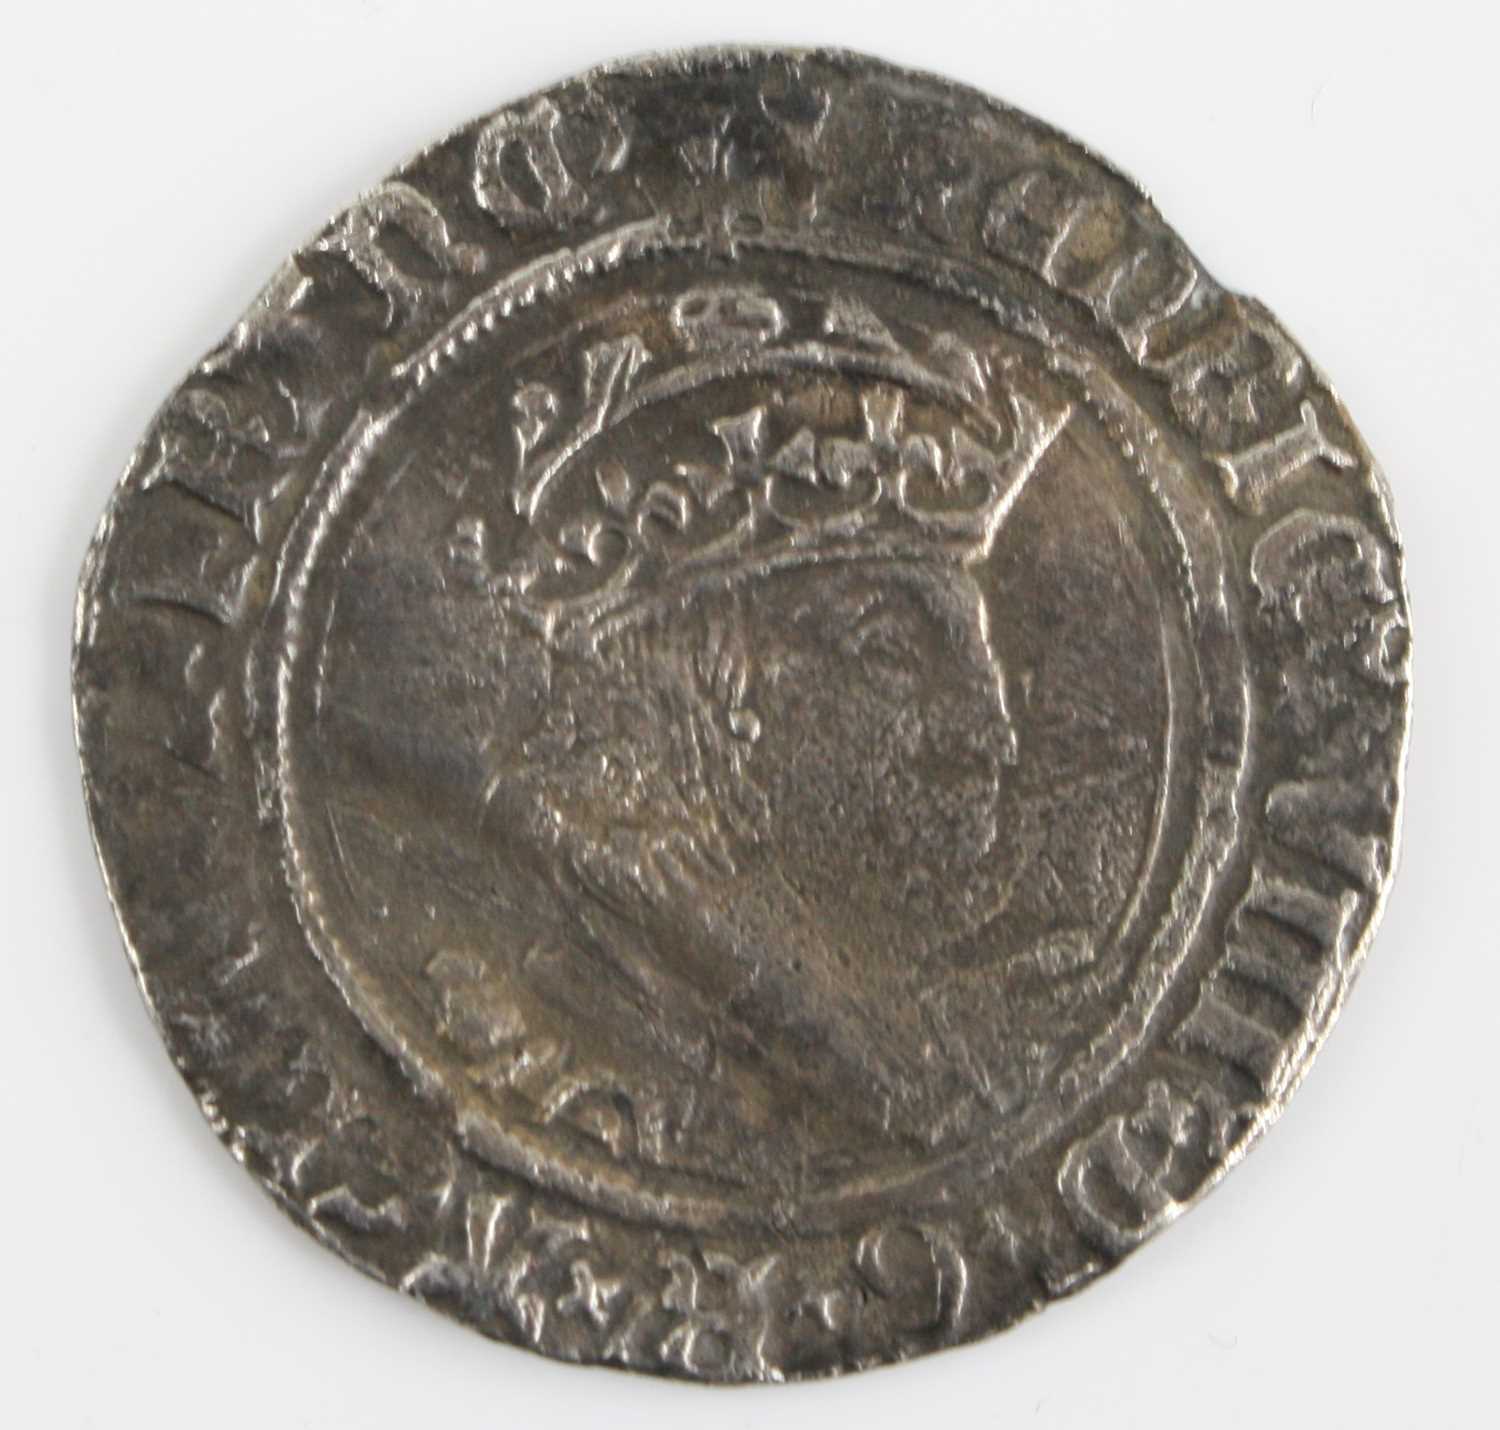 England, Henry VIII (1509-1547) groat, obv: crowned and draped bust of King Henry VIII facing right,